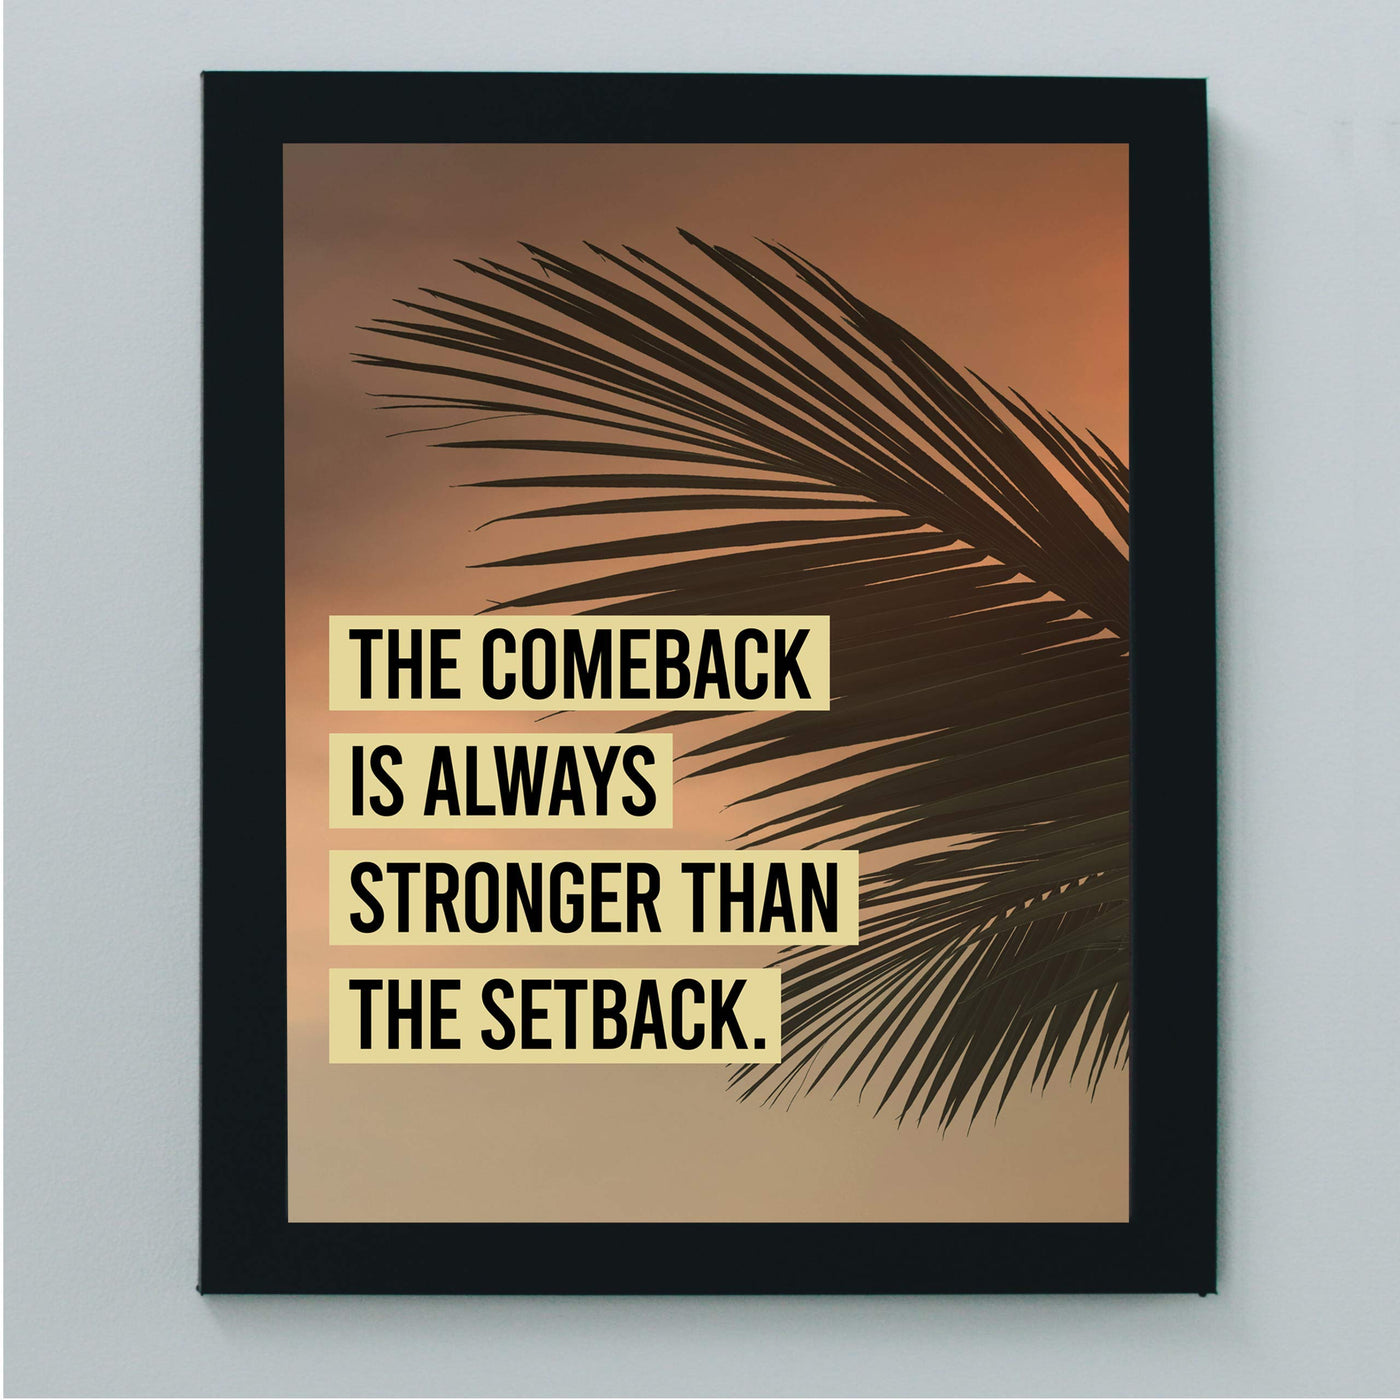 The Comeback Is Always Stronger Than The Setback Motivational Wall Art-8 x 10" Typographic Palm Tree Print-Ready to Frame. Inspirational Decor for Home-Office-Work-Beach. Great Gift for Motivation!